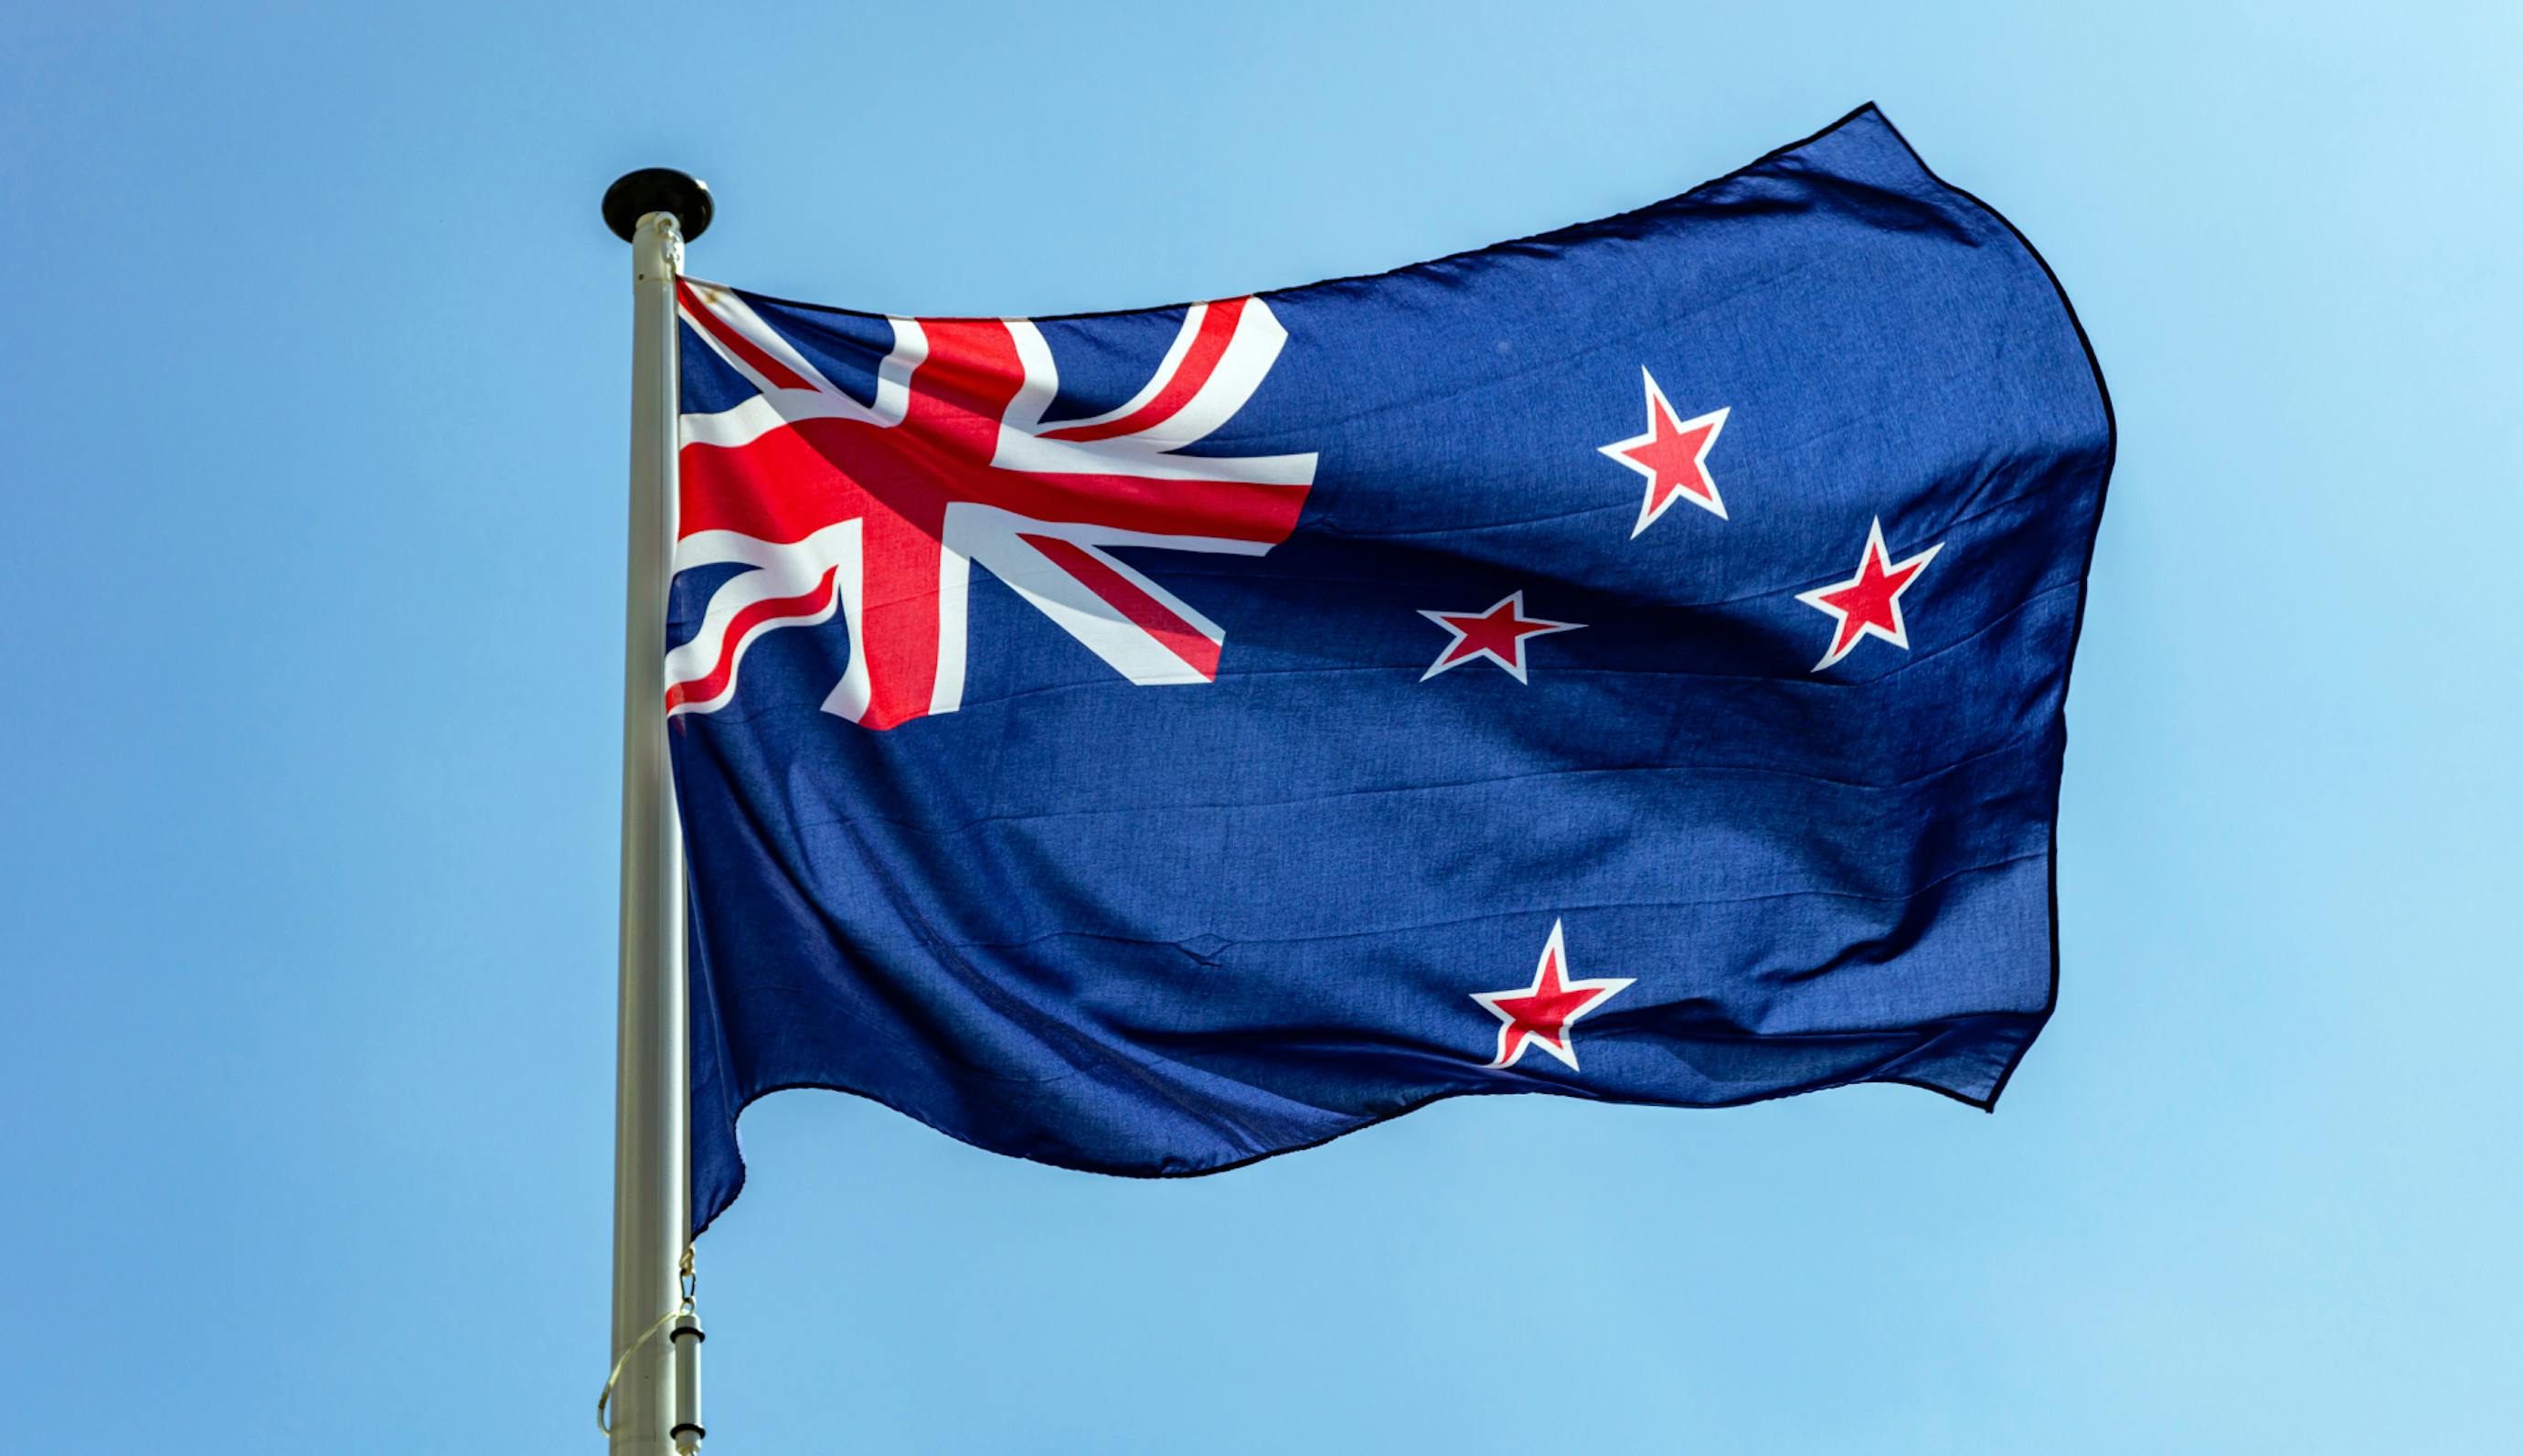 The flag of new zealand flying in the wind